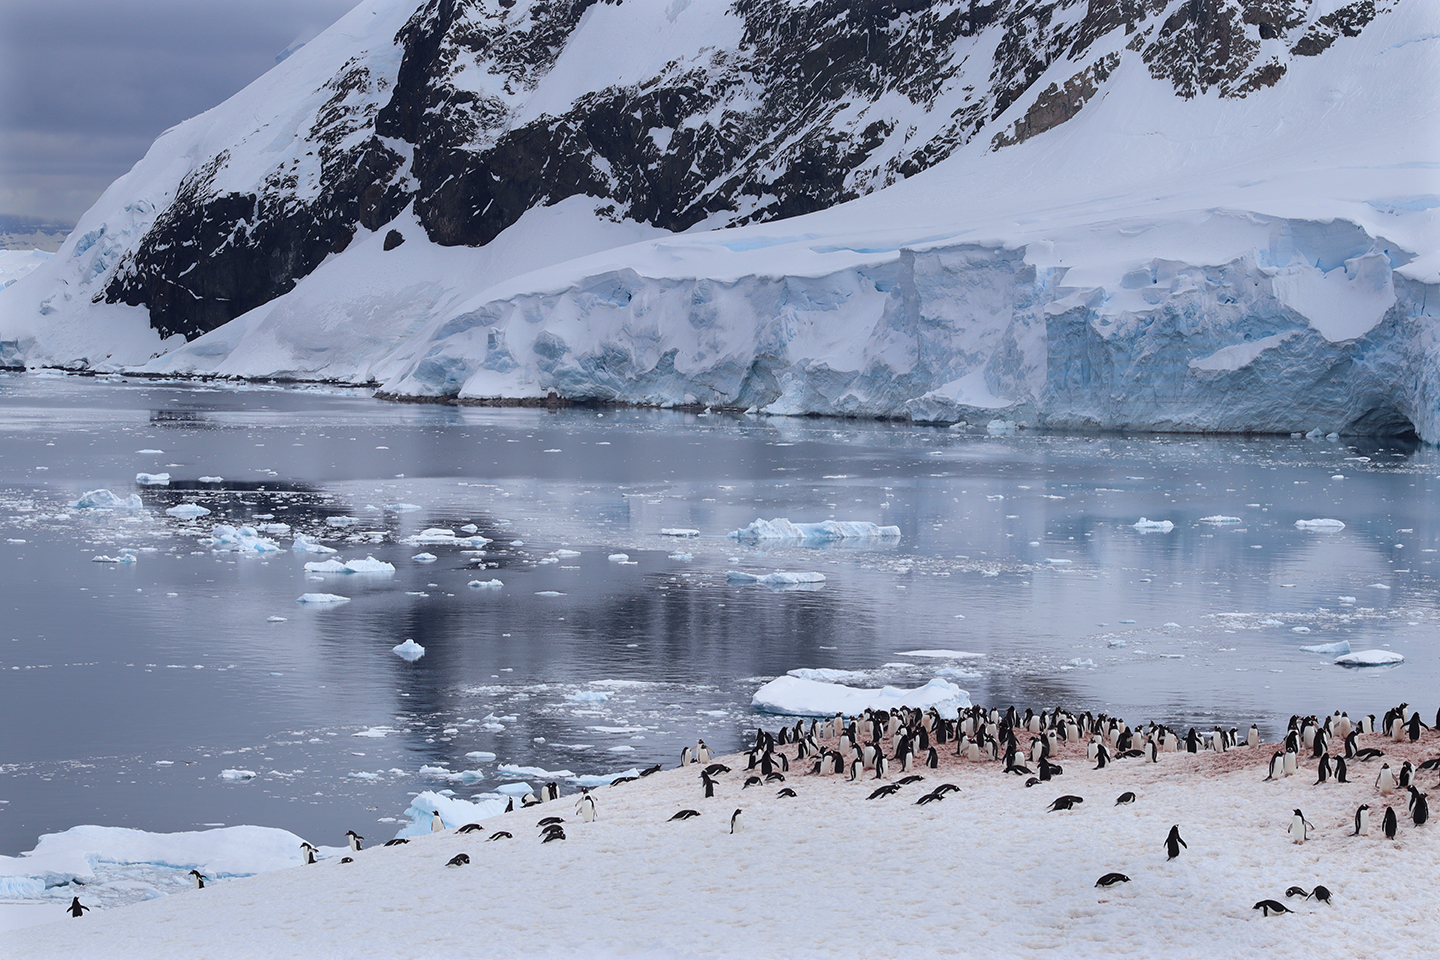 Penguins, water and icy mountains in Antarctica